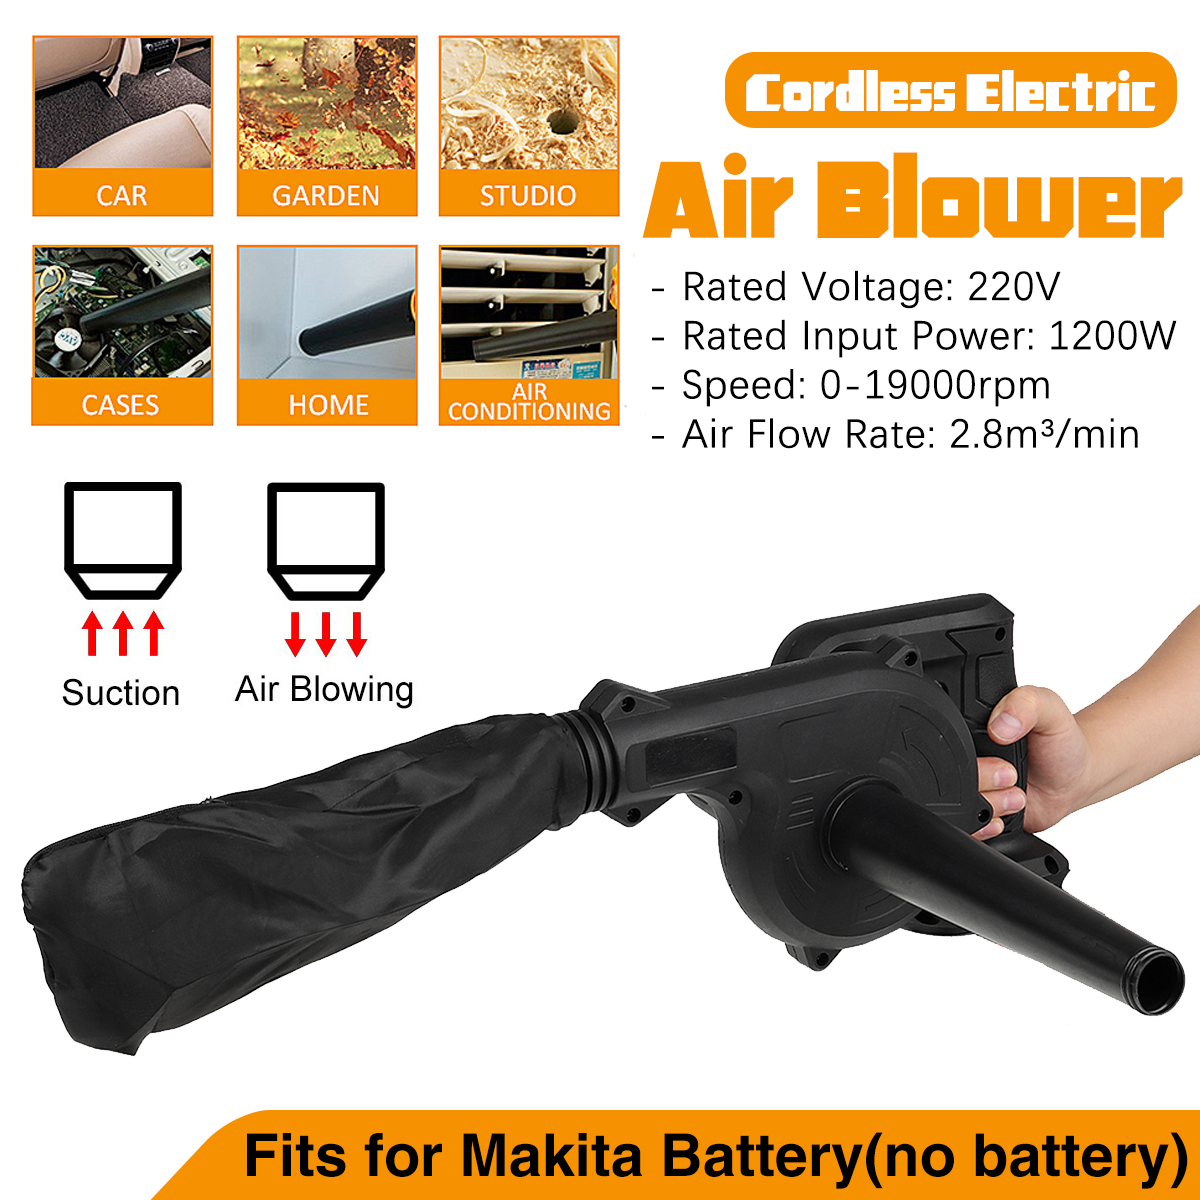 1200W-Cordless-Electric-Air-Blower-Vacuum-Cleaner-Dust-Collector-Sweeper-For-Makita-Battery-1857530-2